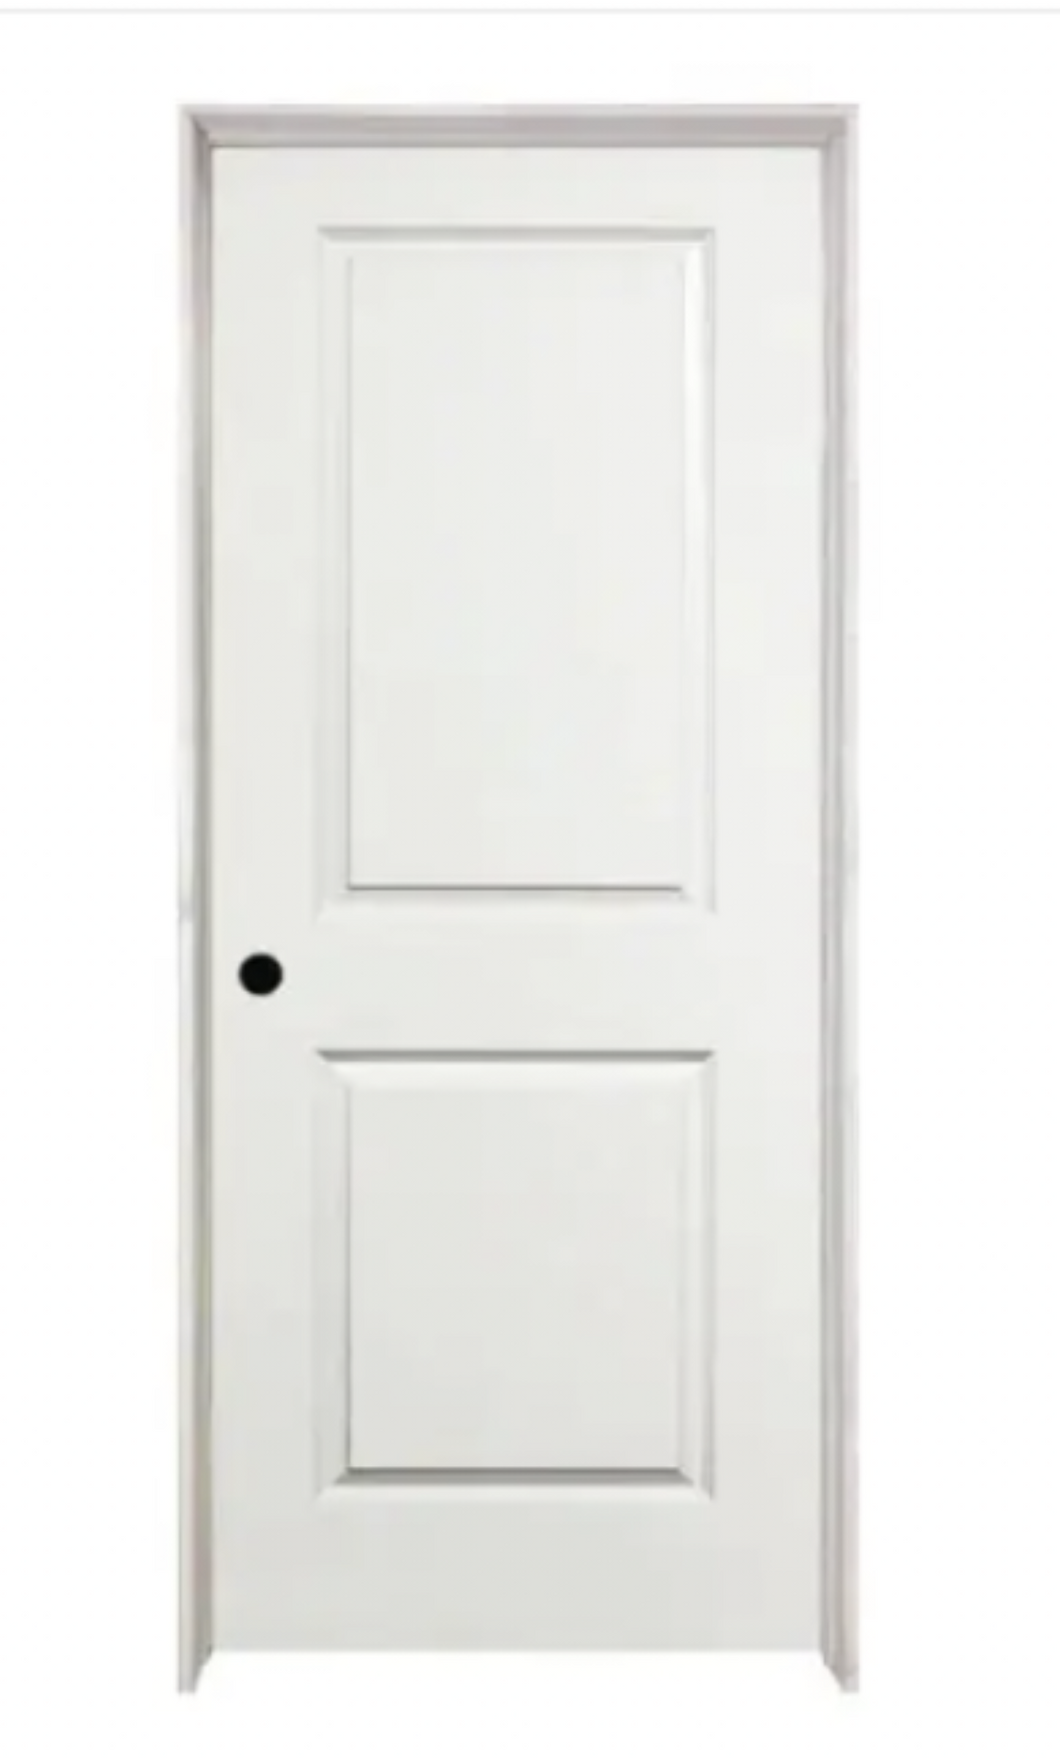 30 in. x 80 in. 2-Panel Square Top White Primed Classic Composite Smooth Hollow Core Single Prehung Interior Door - right hand